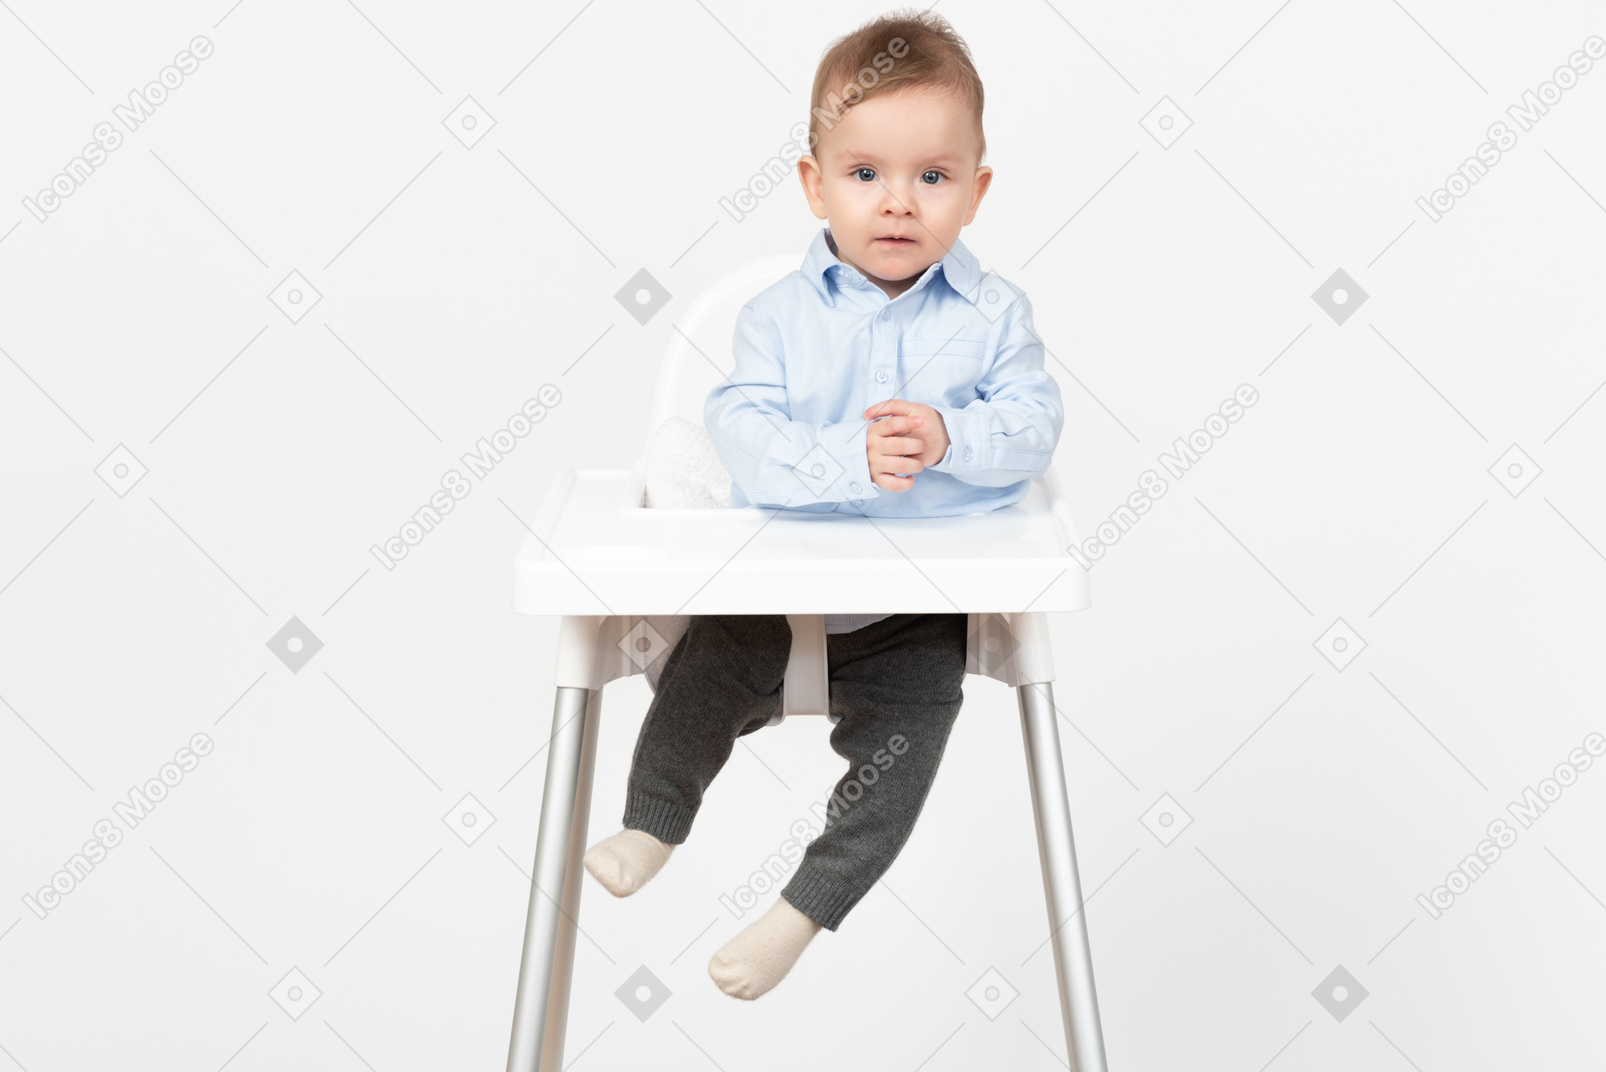 Adorable smiling baby boy sitting in highchair